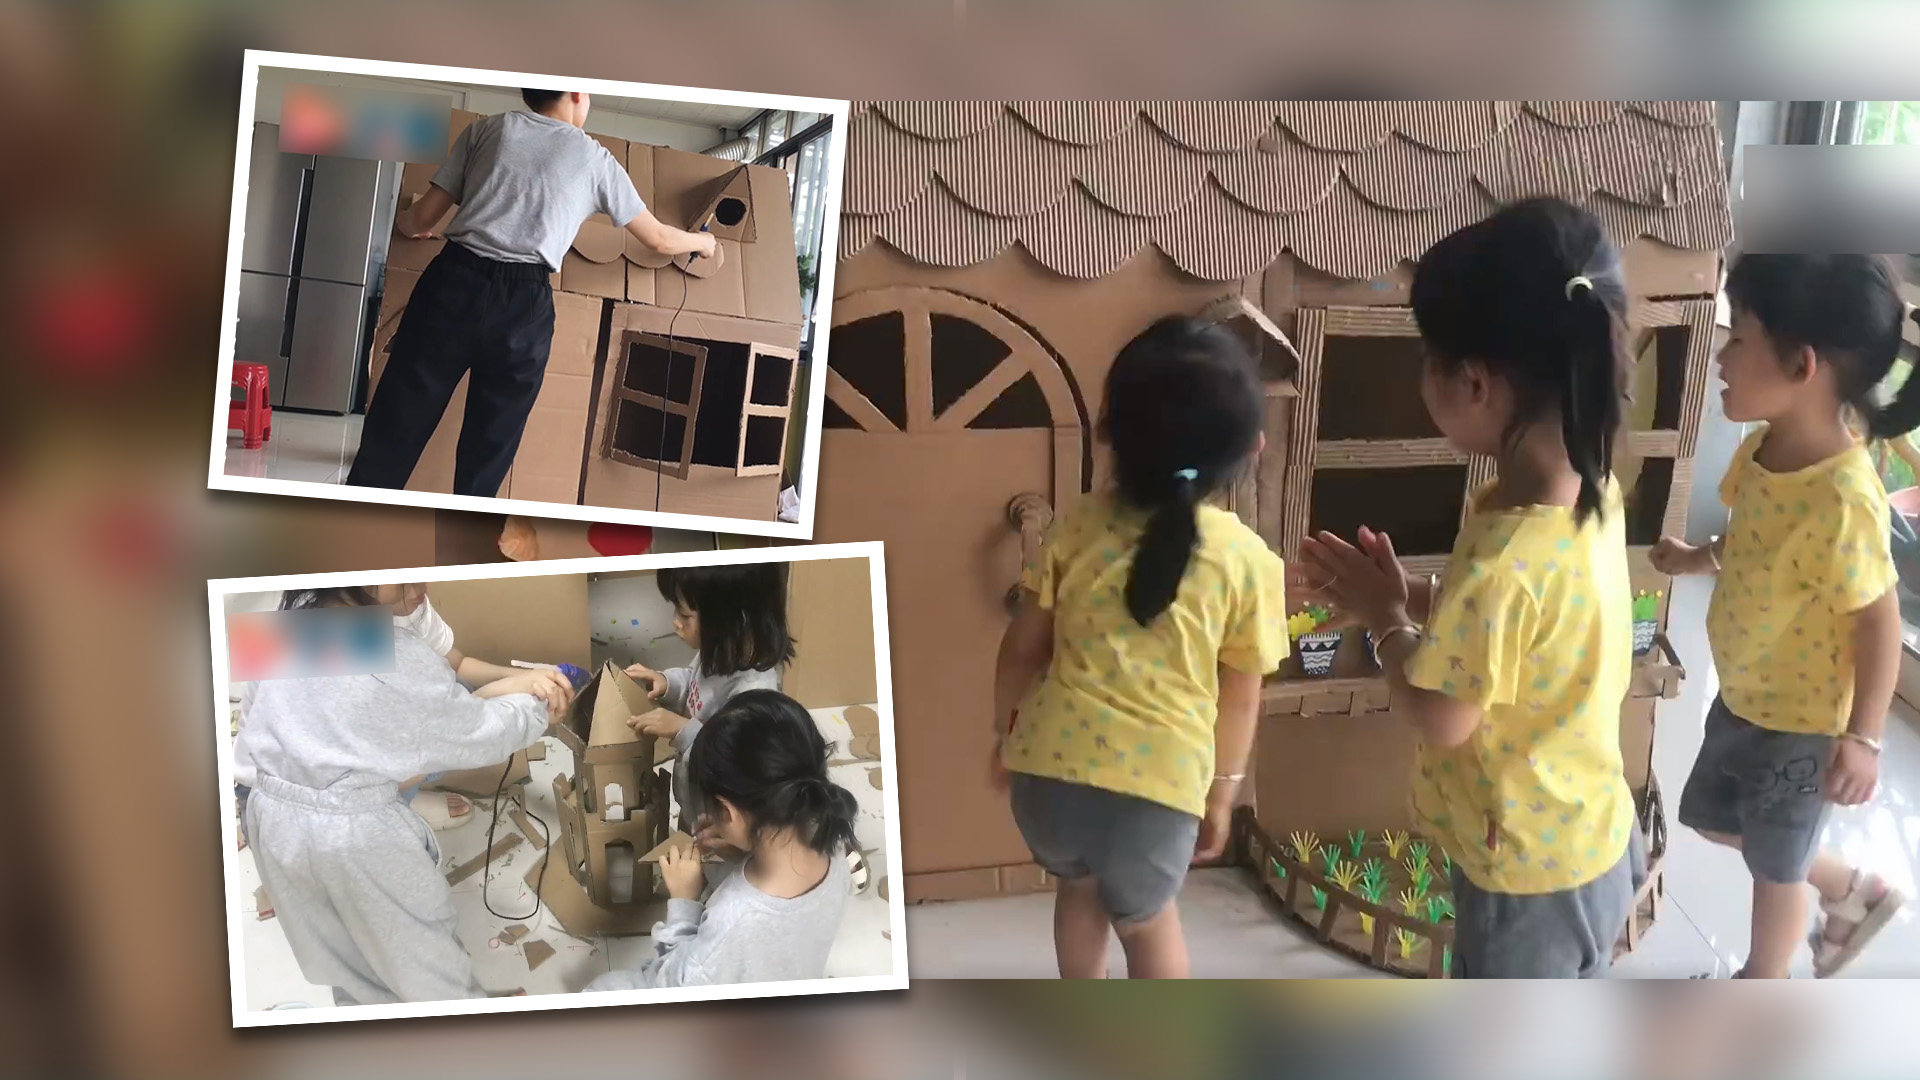 A mother in China has trended online after using her creative talents to turn leftover cardboard into toys, including a giant playhouse and a Transformer car for her kids. Photo: SCMP composite/Weibo